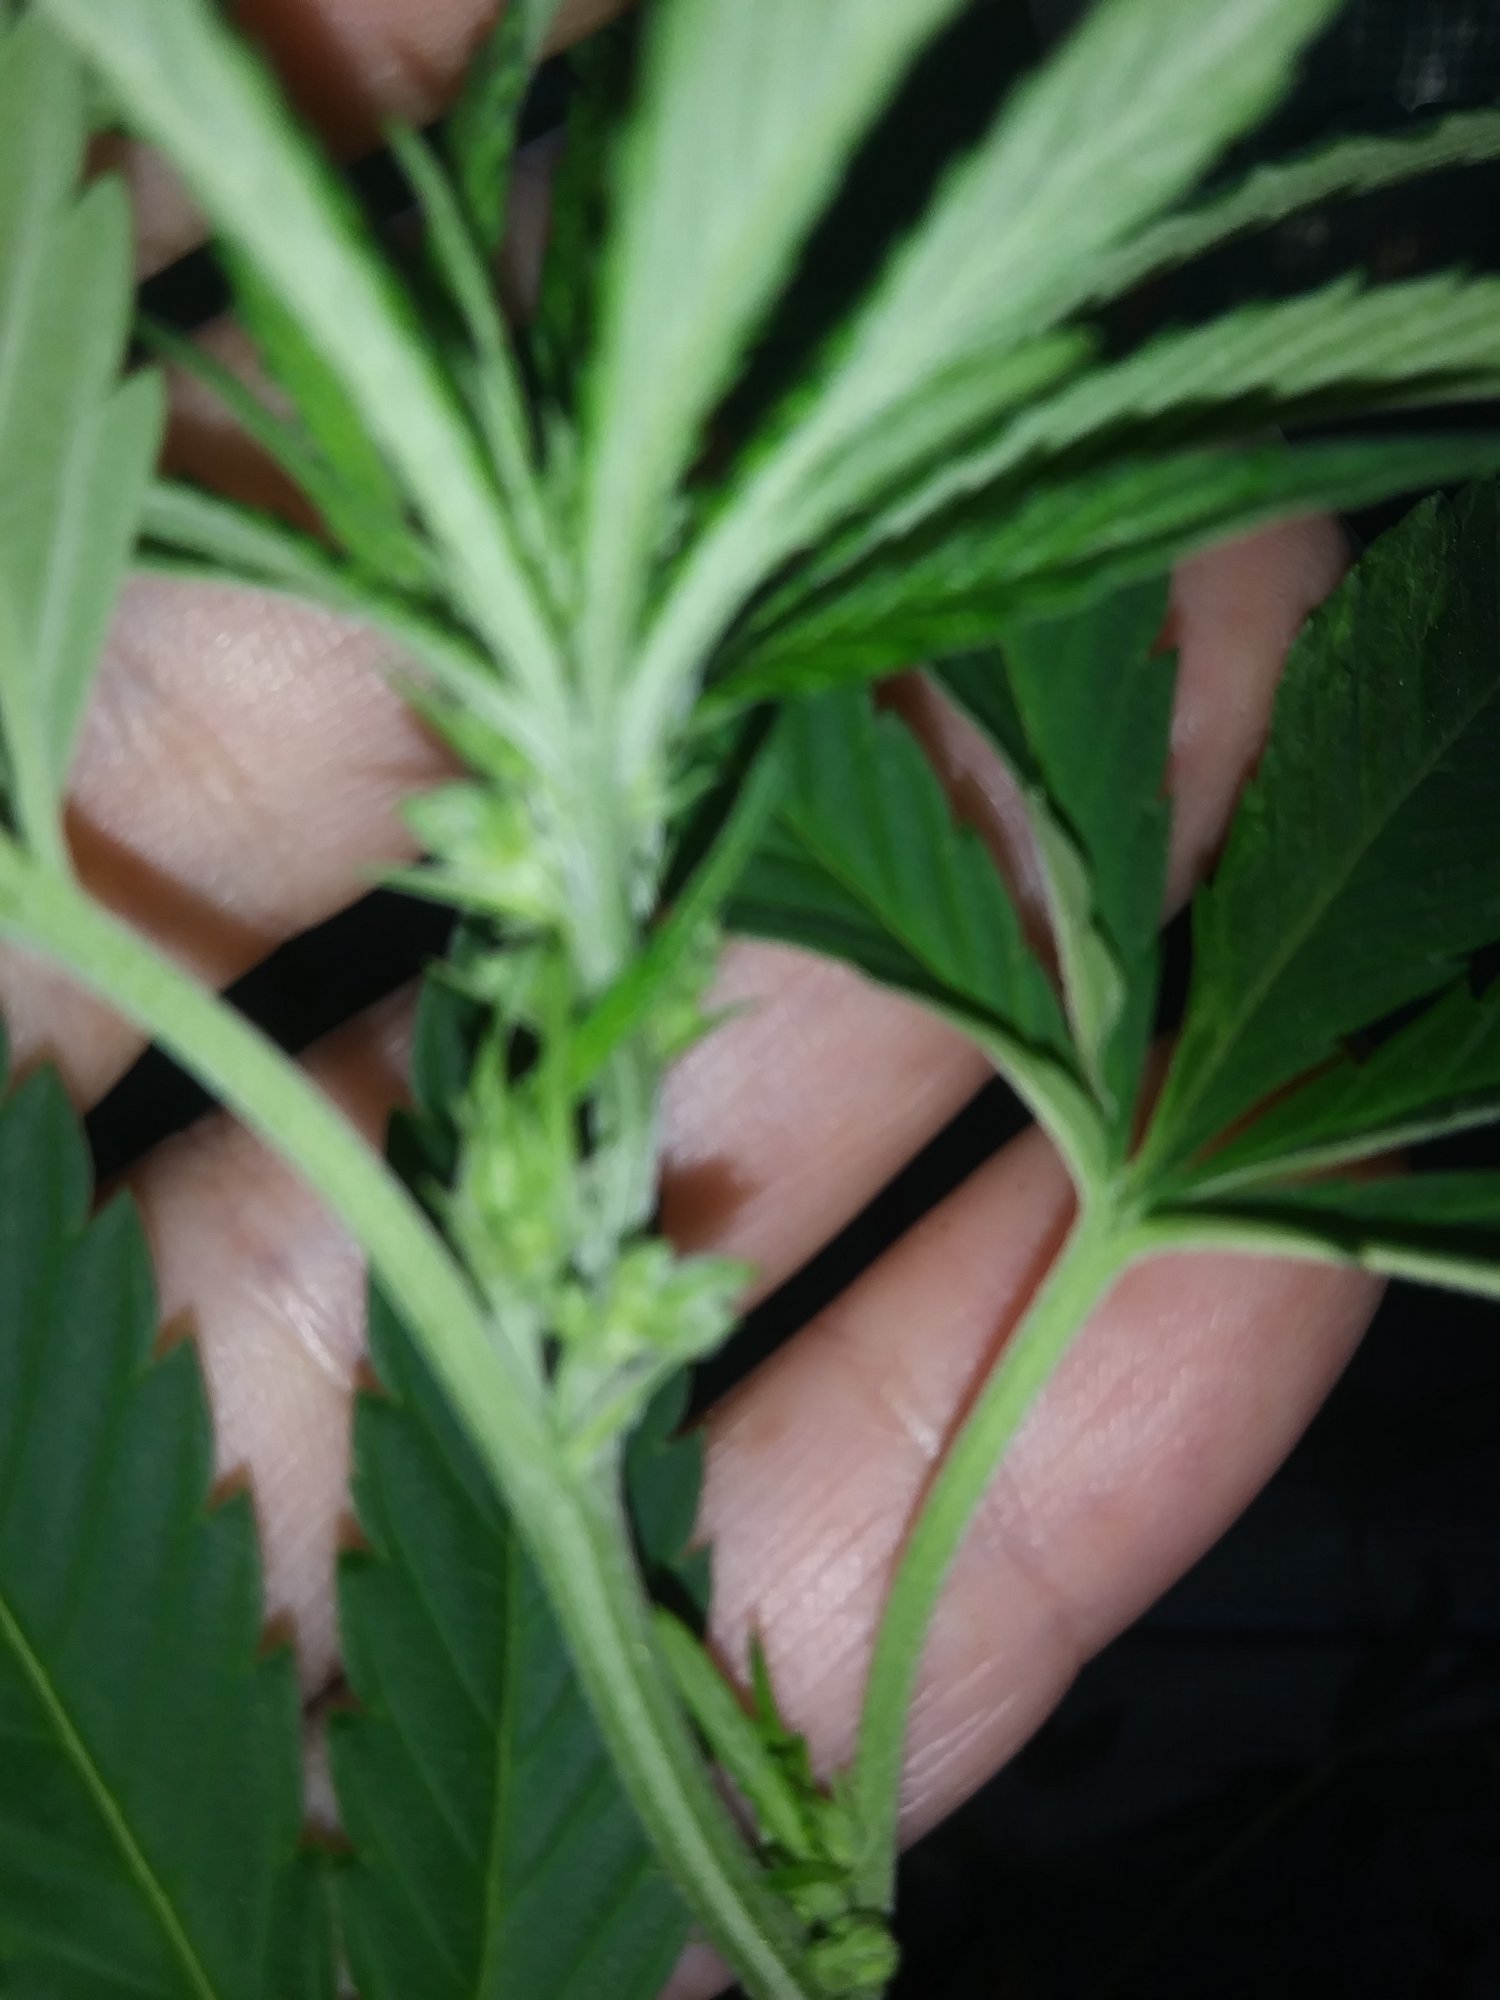 Help with sexing a female clone